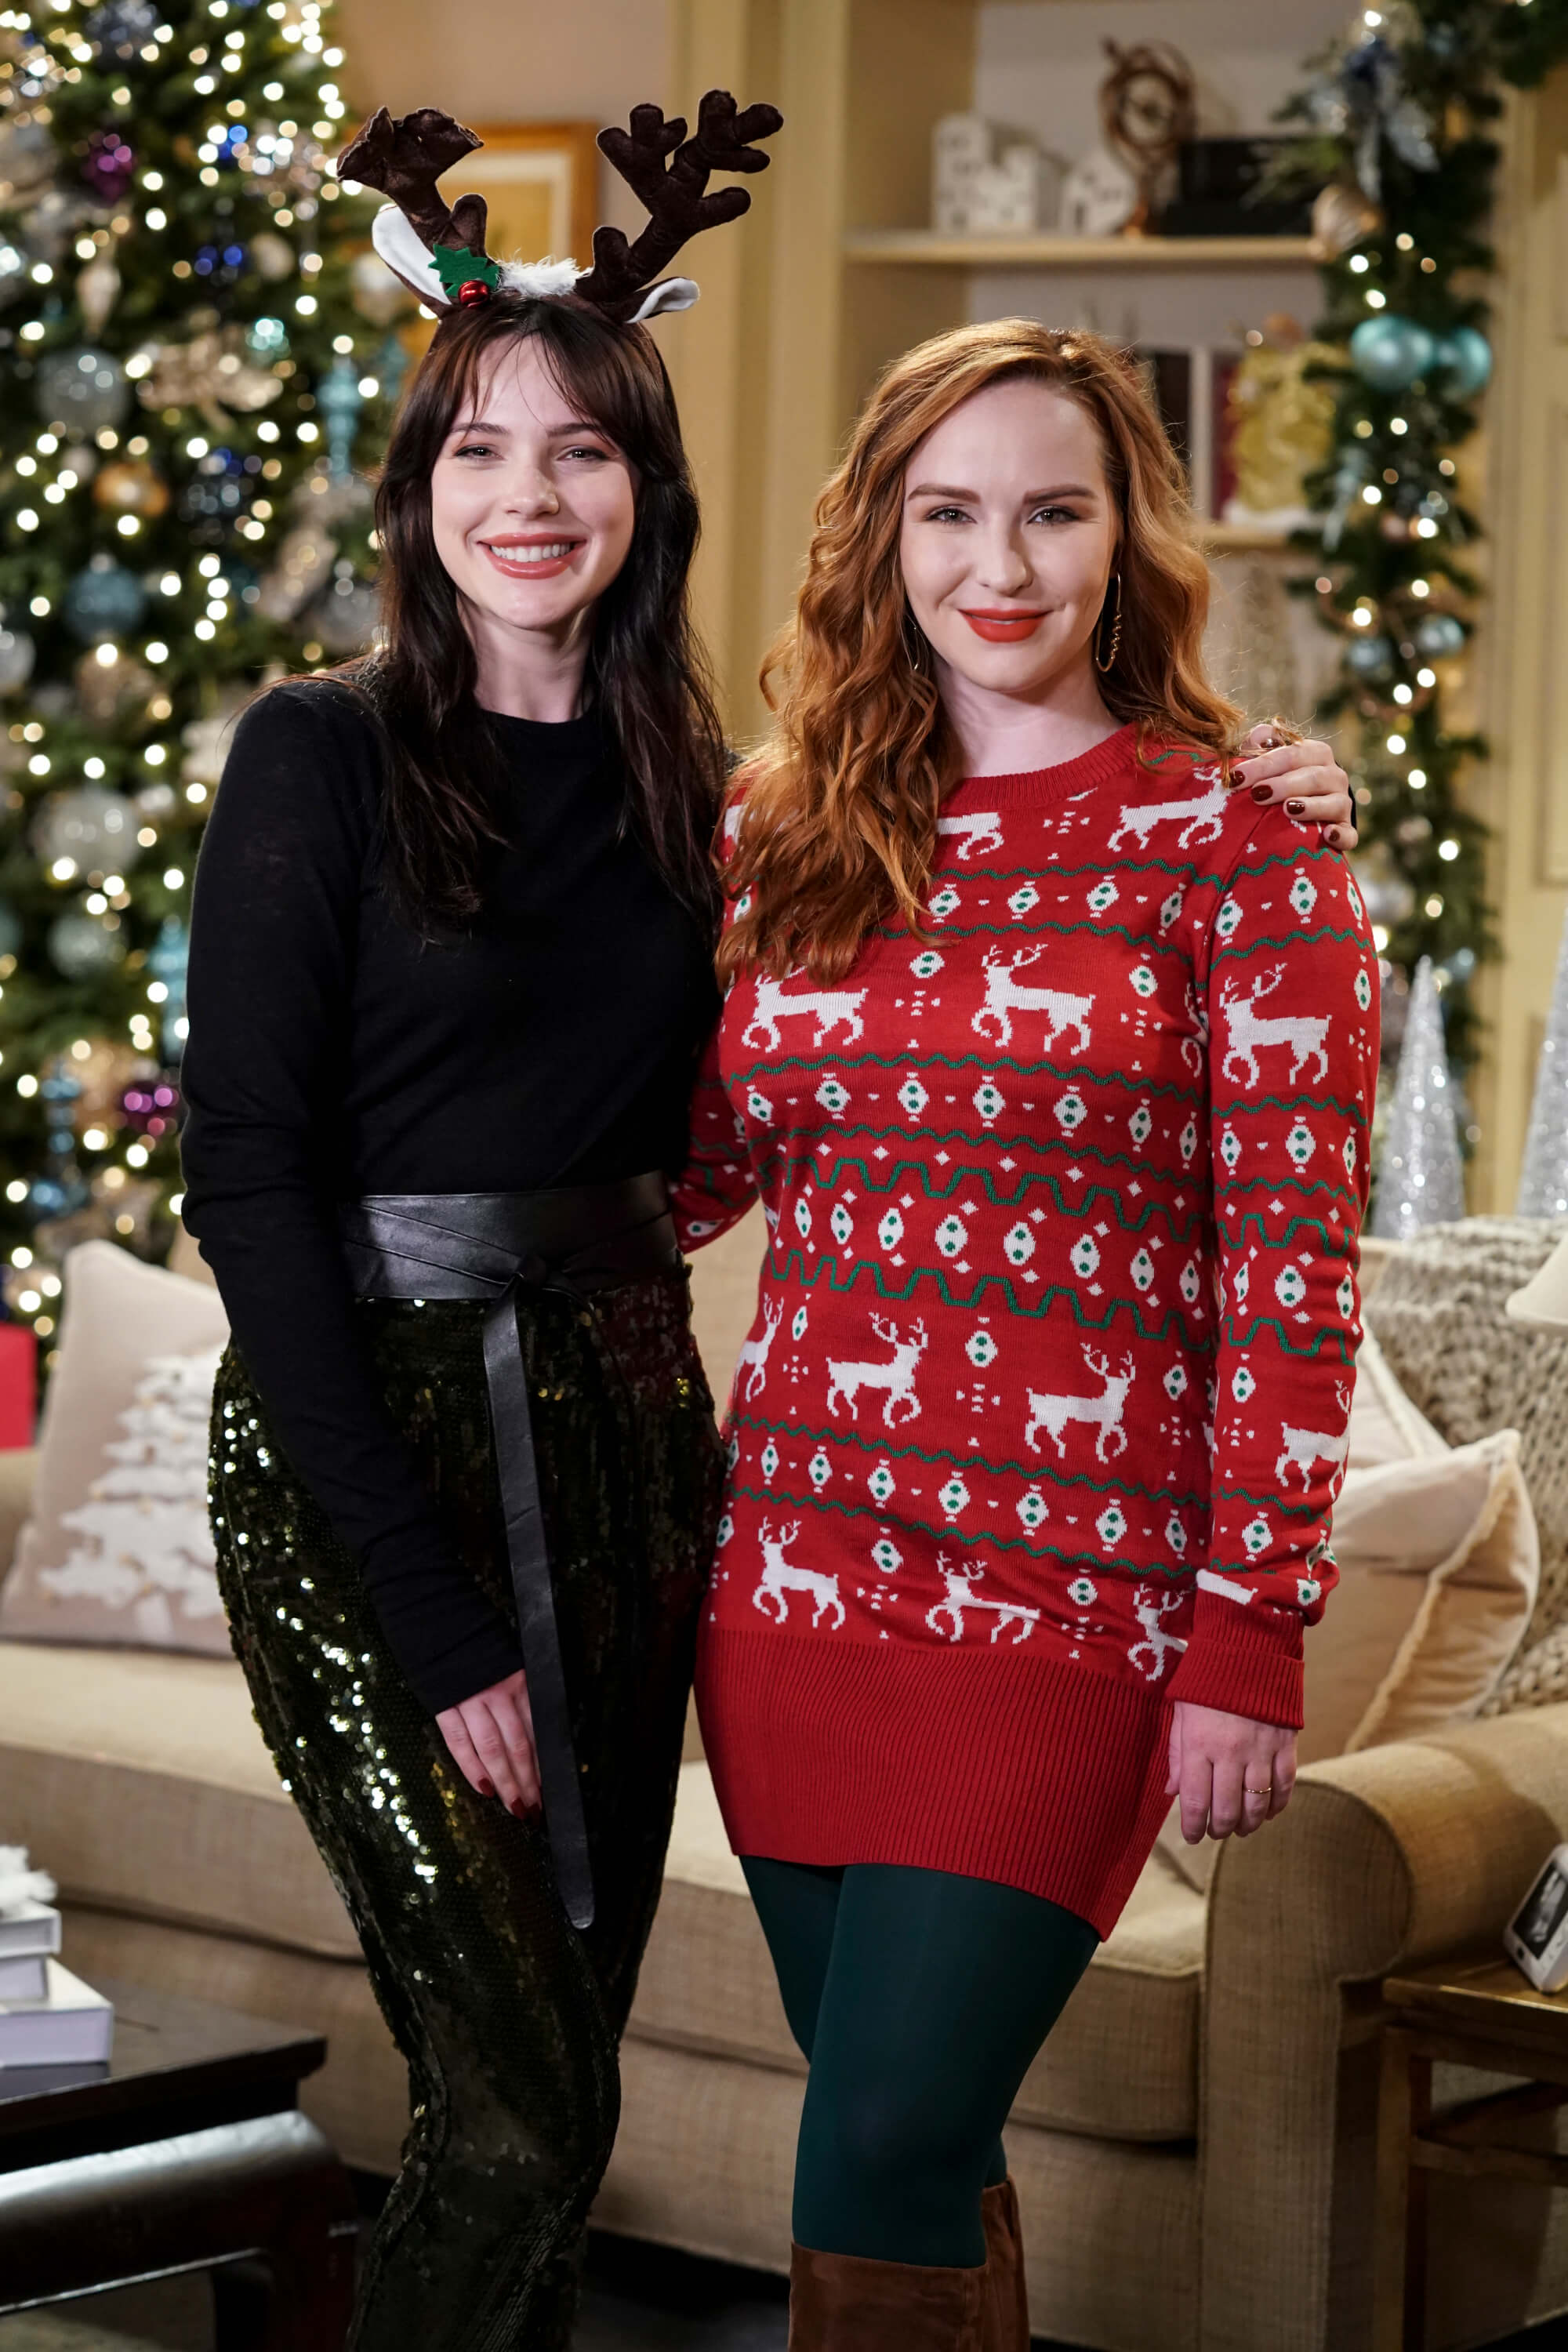 'The Young and the Restless' stars Cait Fairbanks and Camryn Grimes posing together during a Christmas scene.